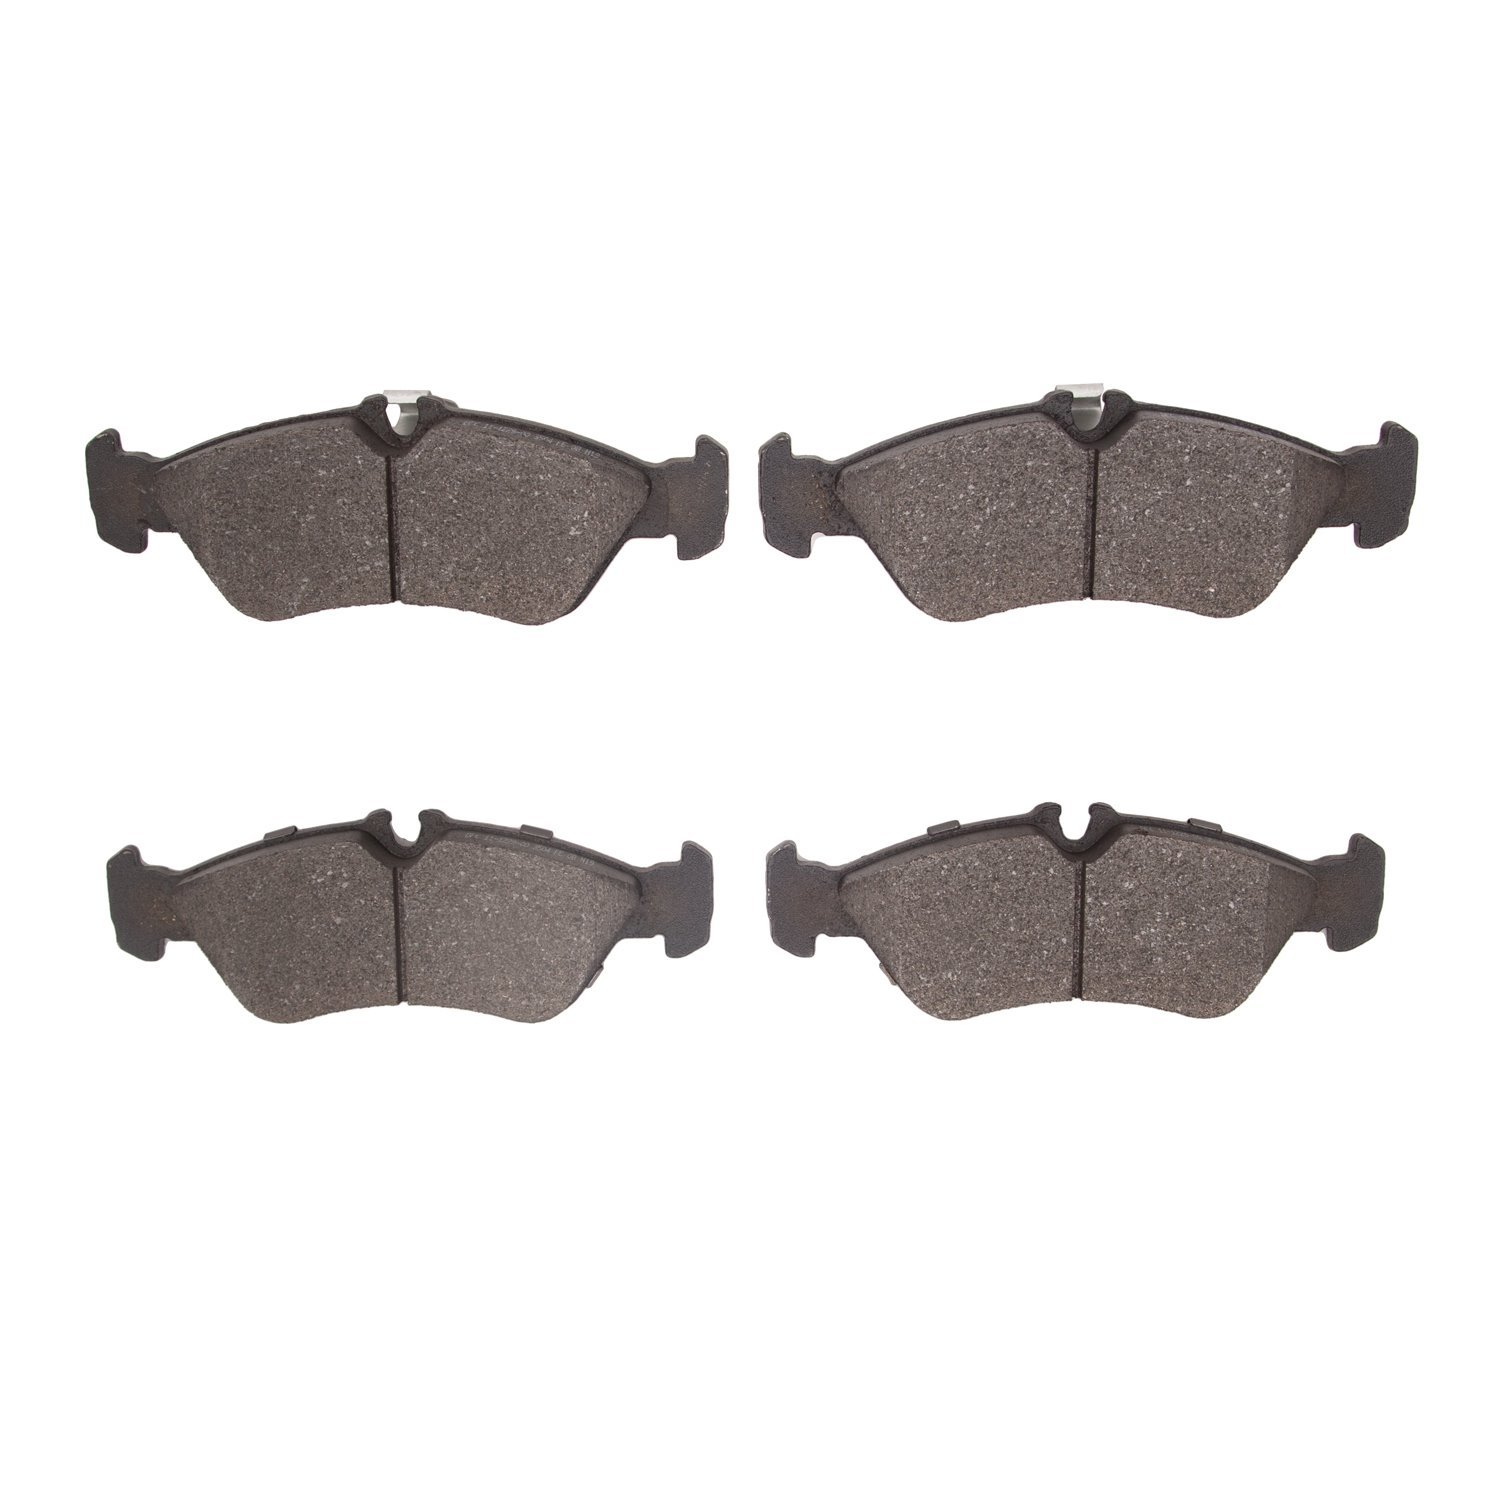 Optimum OE Brake Pads, 2002-2006 Fits Multiple Makes/Models, Position: Rear Right